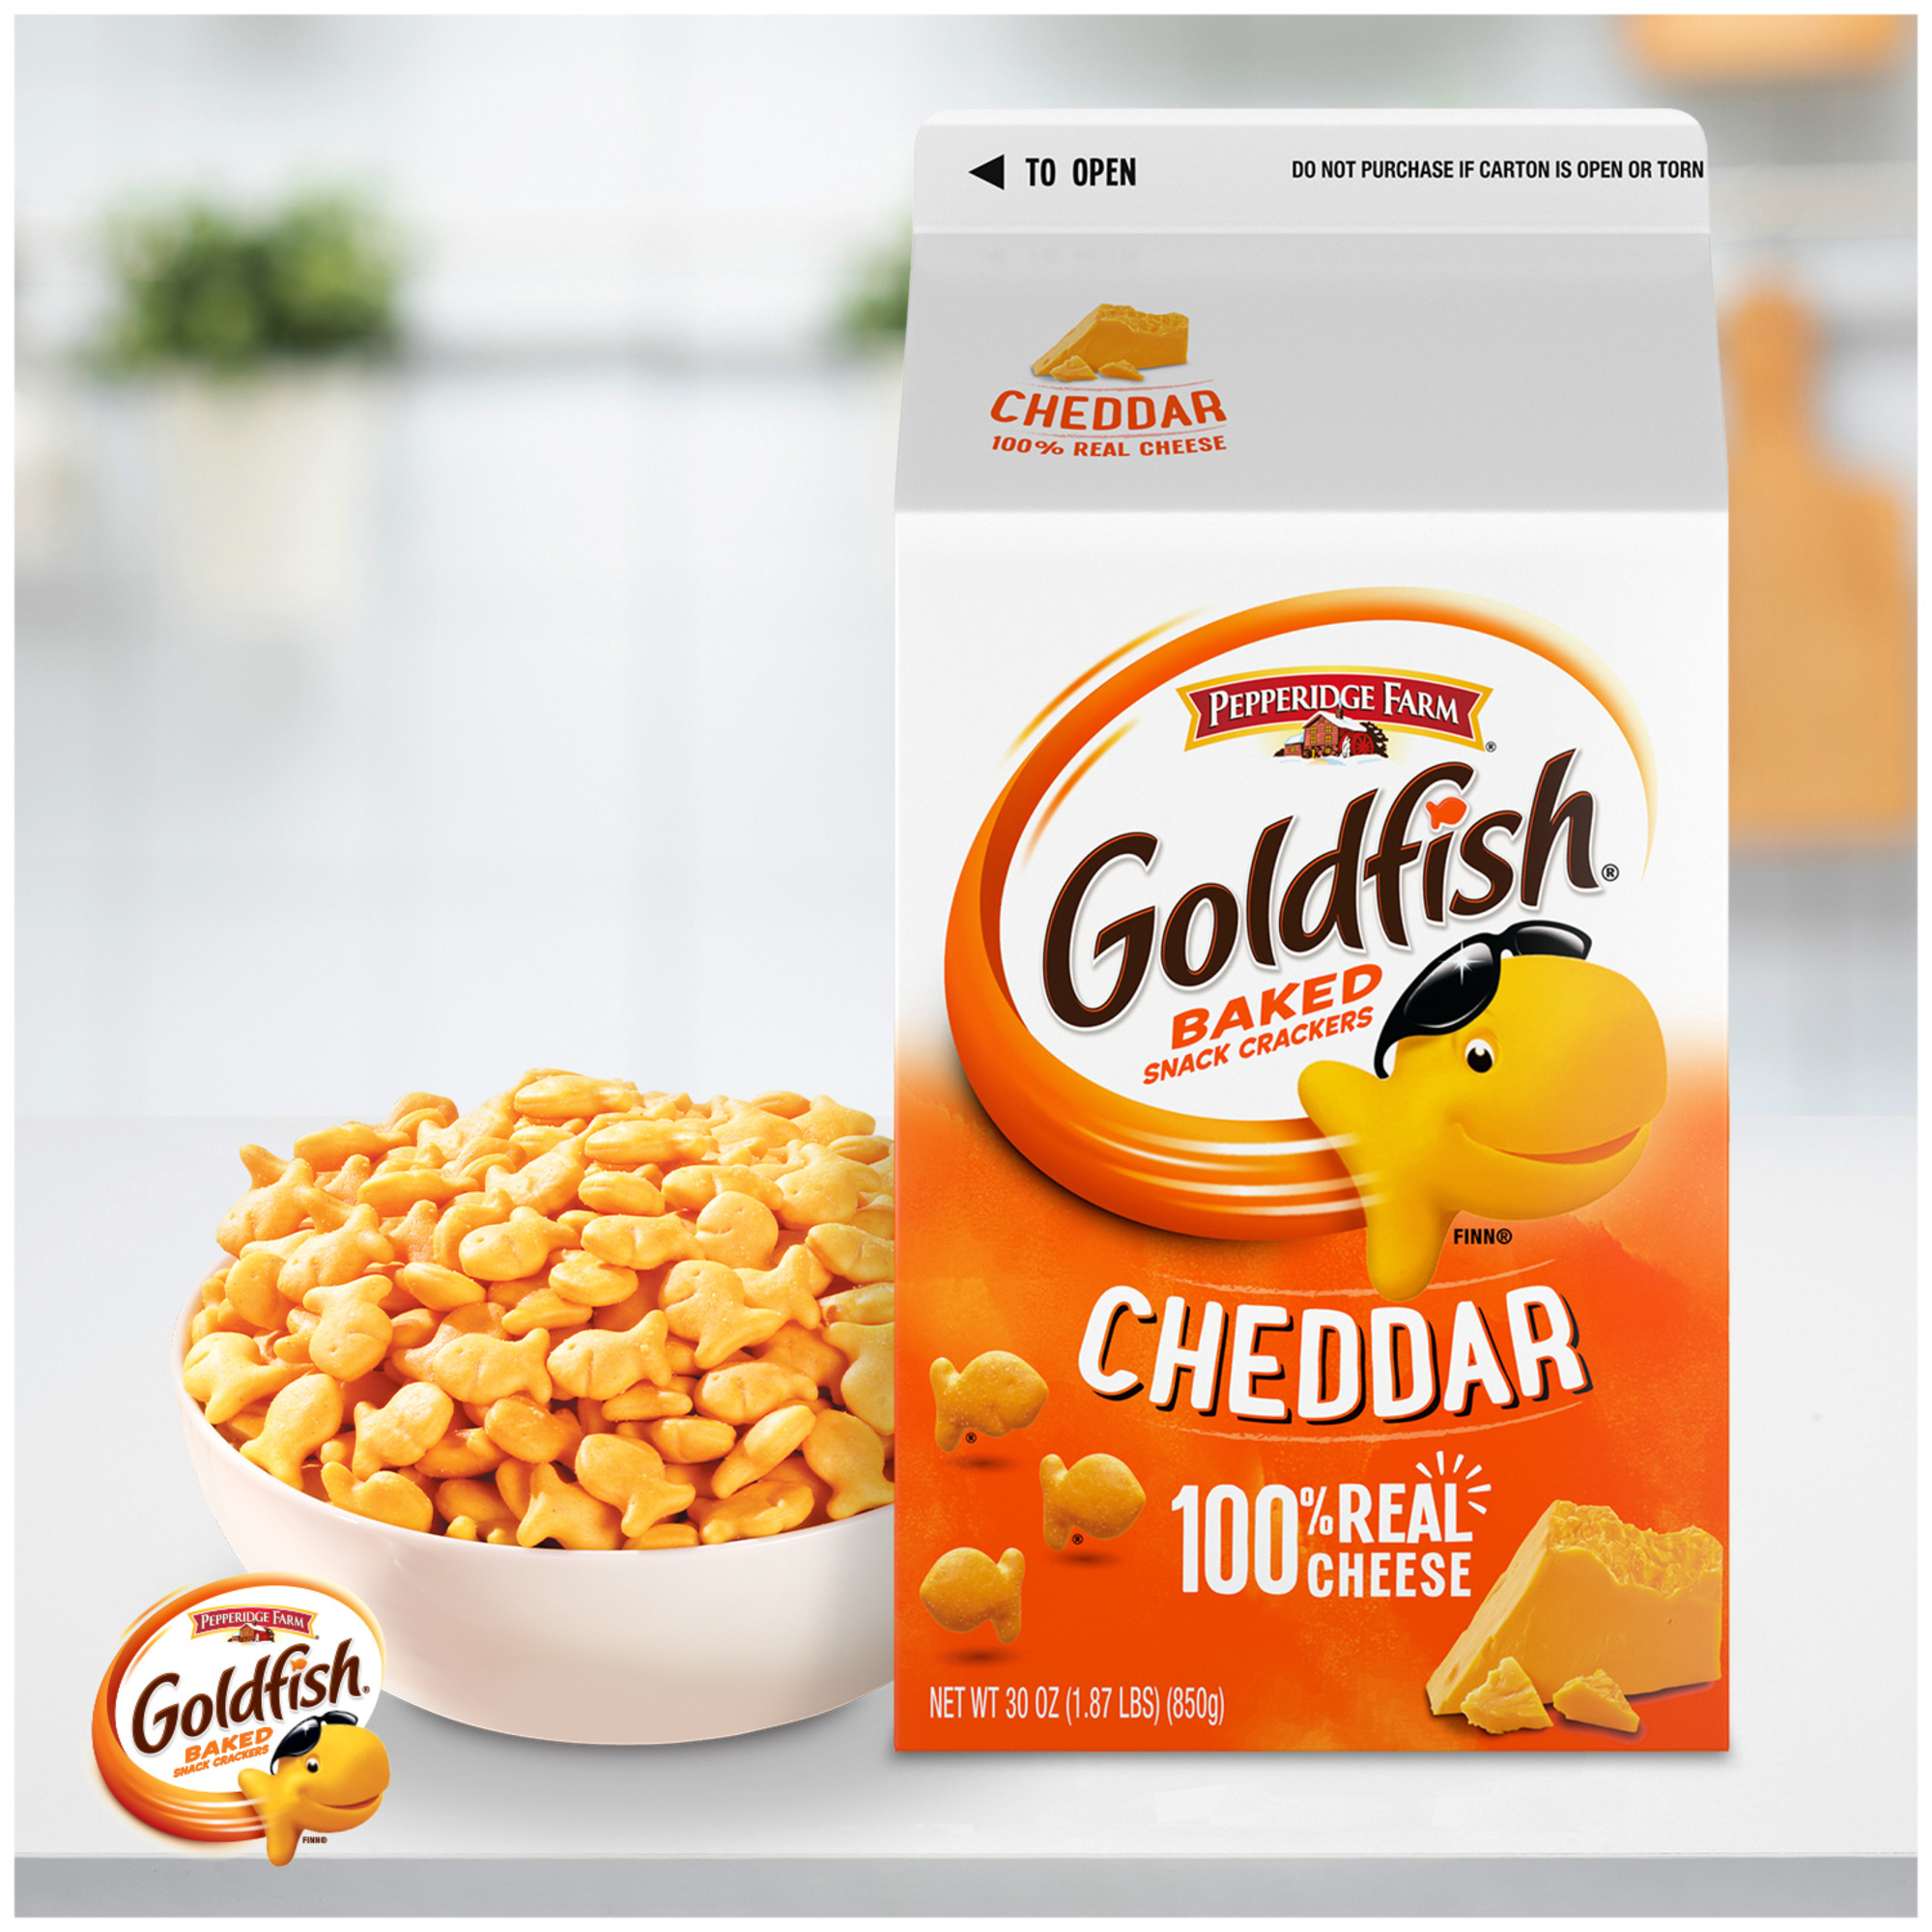 Goldfish Cheddar Cheese Crackers, Baked Snack Crackers, 30 oz Carton - image 4 of 11